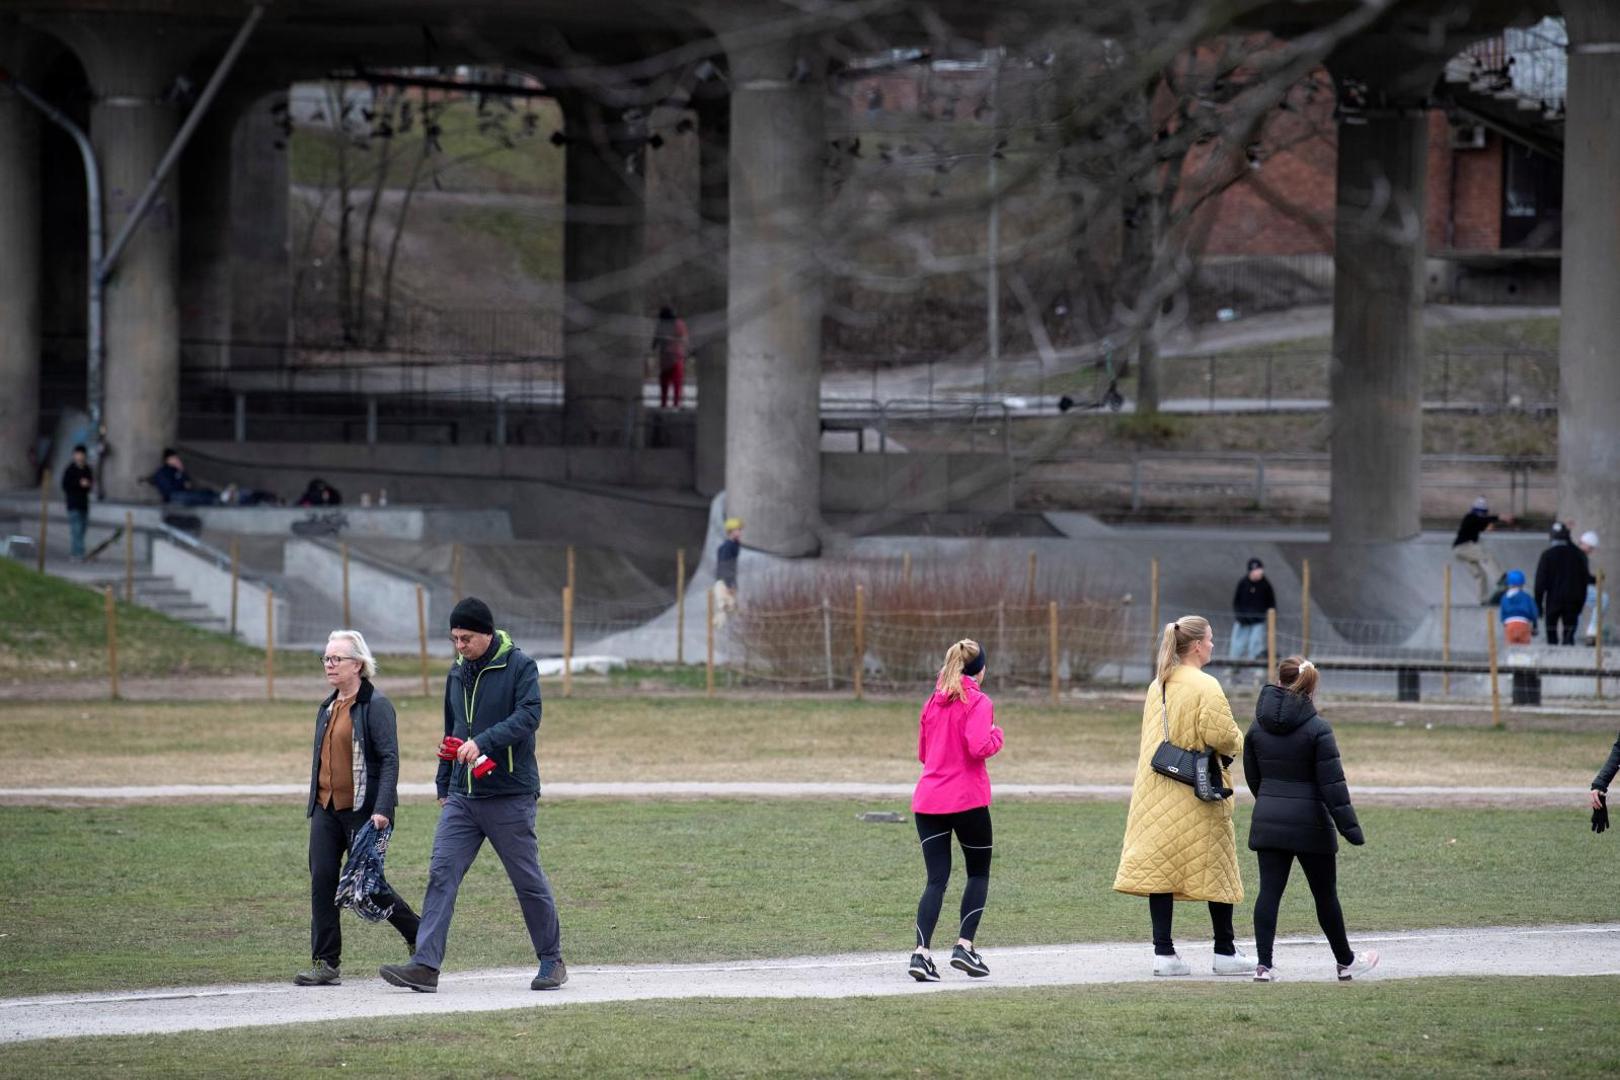 The spread of the coronavirus disease (COVID-19) in Stockholm People walk and jog past Ralis Skatepark in central Stockholm, as the spread of the coronavirus disease  continues (COVID-19) in Stockholm, Sweden April 1, 2020. TT News Agency/Jessica Gow  via REUTERS   ATTENTION EDITORS - THIS IMAGE WAS PROVIDED BY A THIRD PARTY. SWEDEN OUT. NO COMMERCIAL OR EDITORIAL SALES IN SWEDEN TT NEWS AGENCY